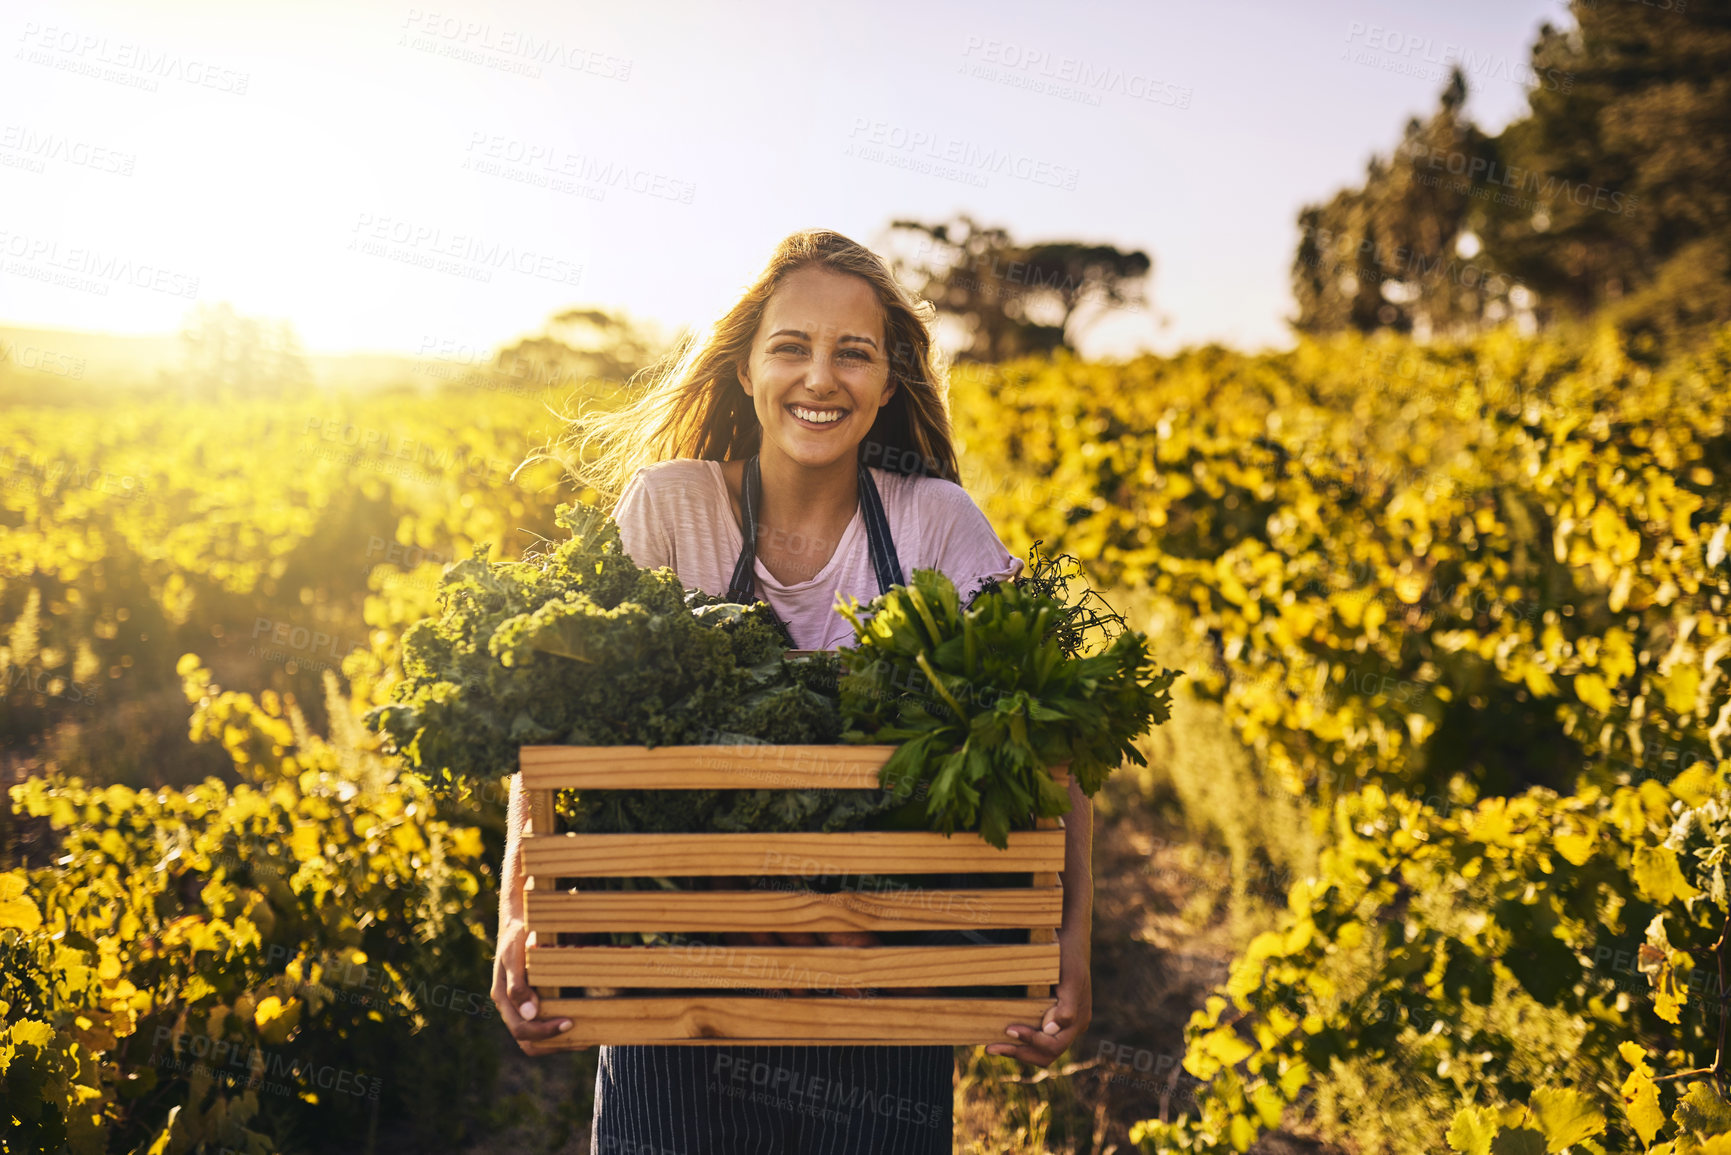 Buy stock photo Shot of a young woman holding a crate full of freshly picked produce on a farm